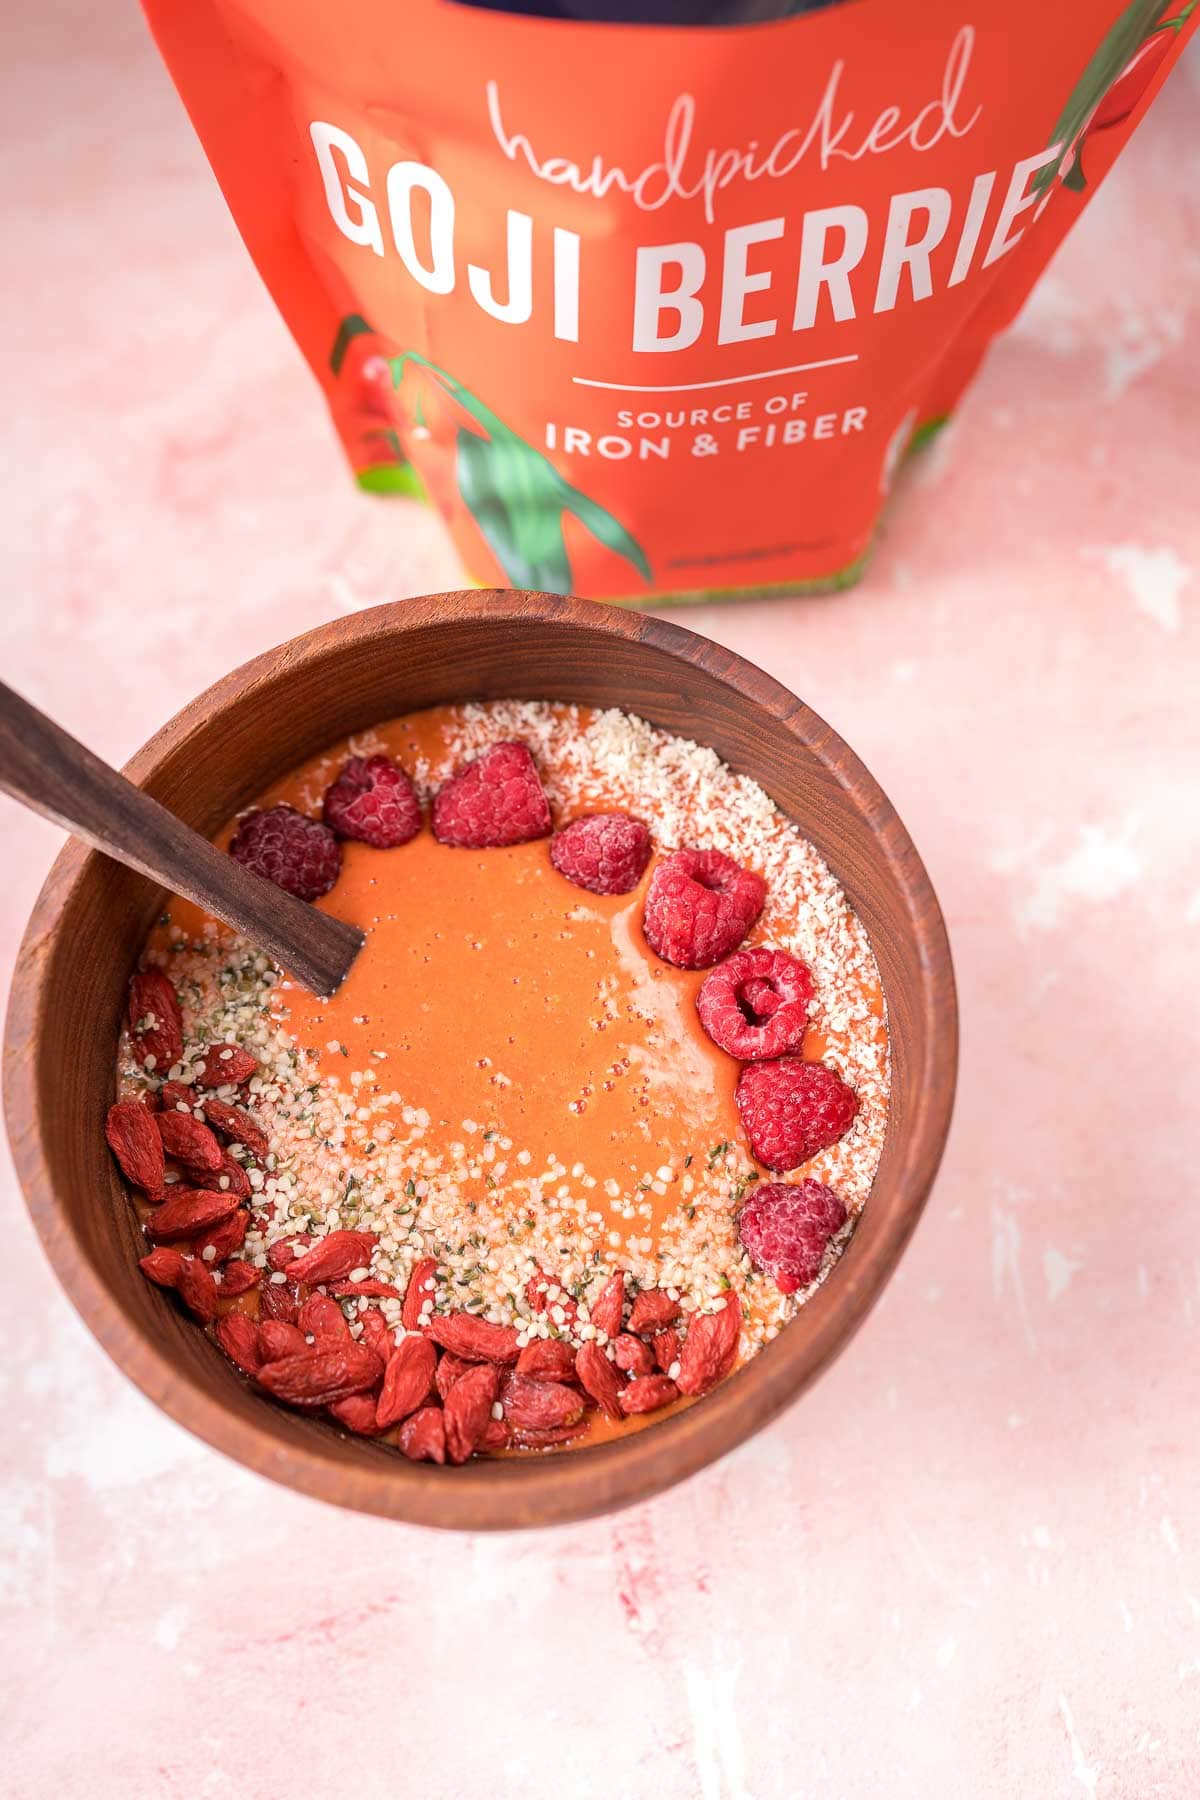 A top view of a goji berry smoothie bowl and a bag of Viva Naturals Goji Berries.